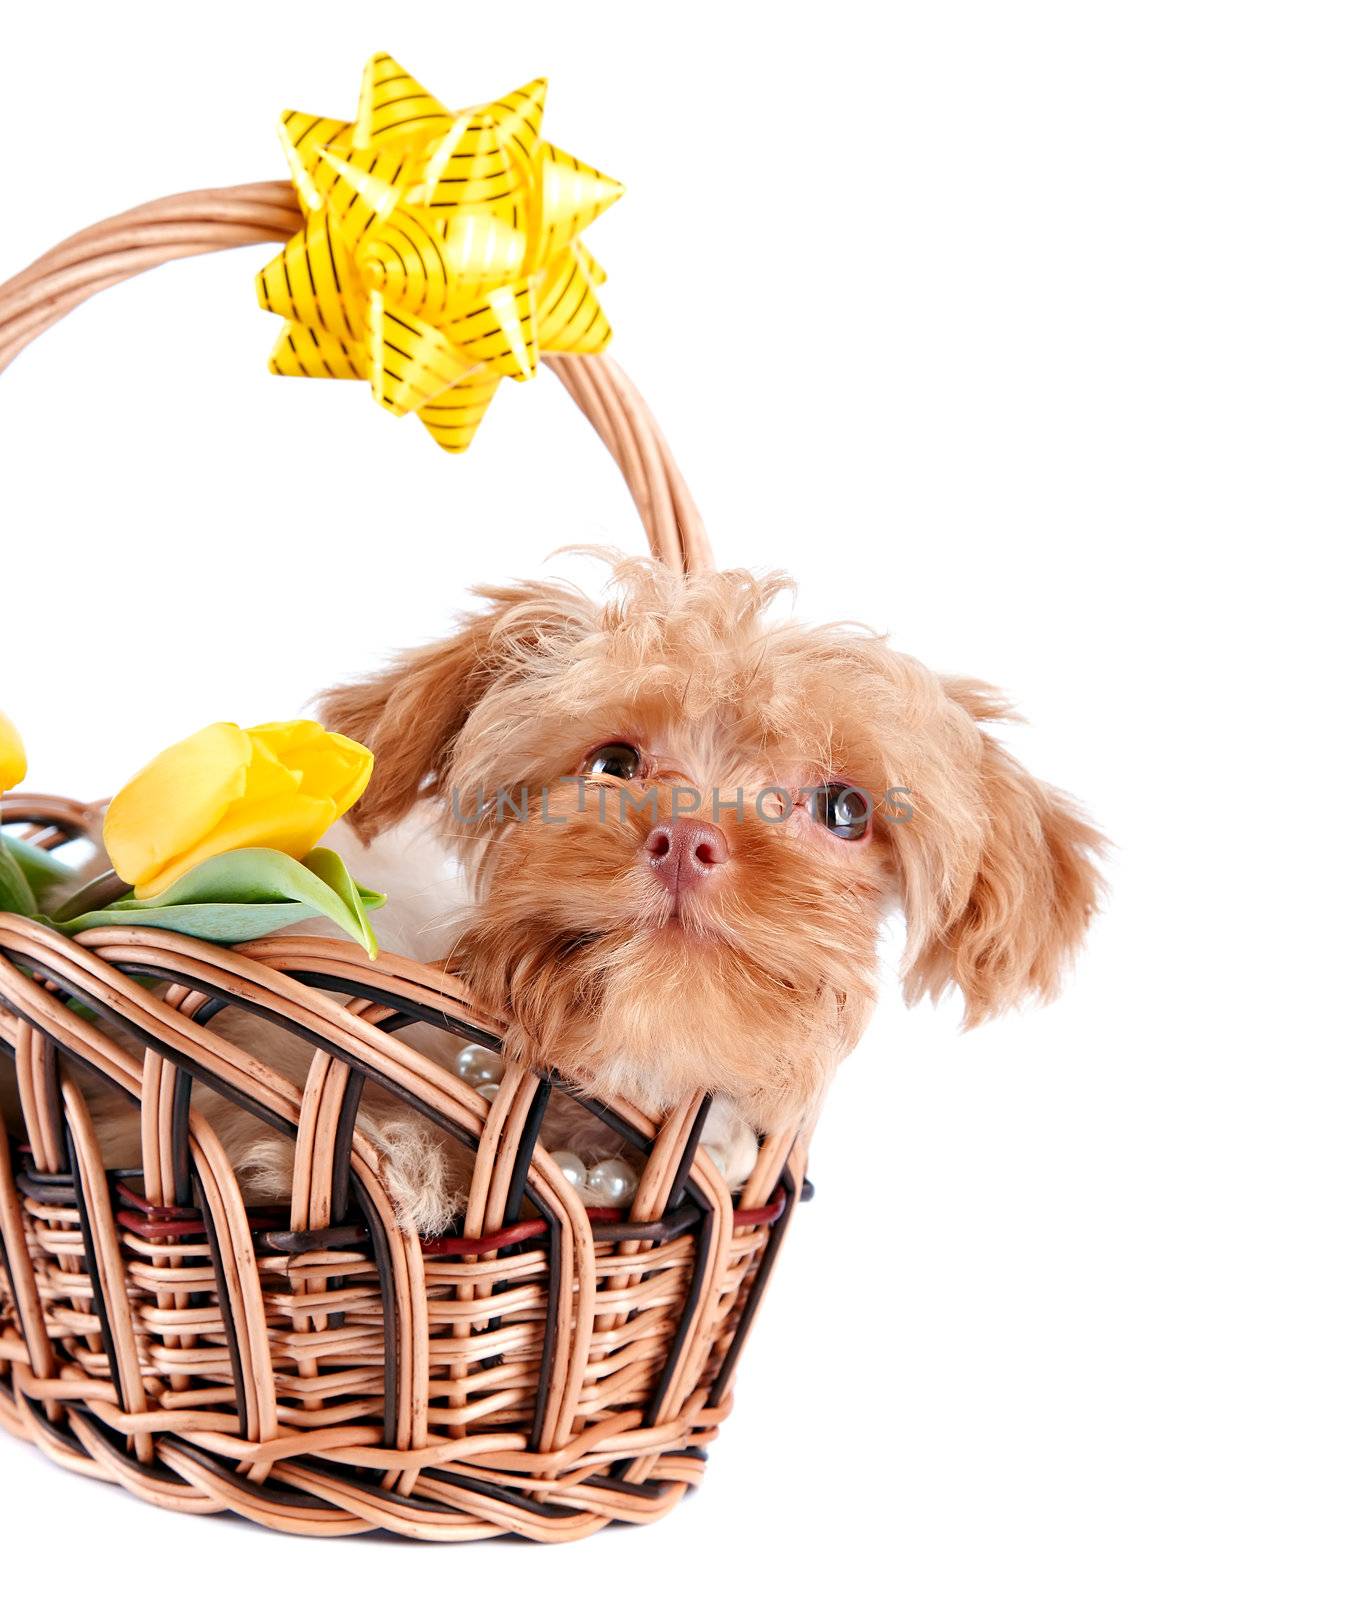 Decorative doggie in a basket. Puppy as a gift. Dog and flowers. Shaggy small doggie. Decorative thoroughbred dog. Puppy of the Petersburg orchid. 